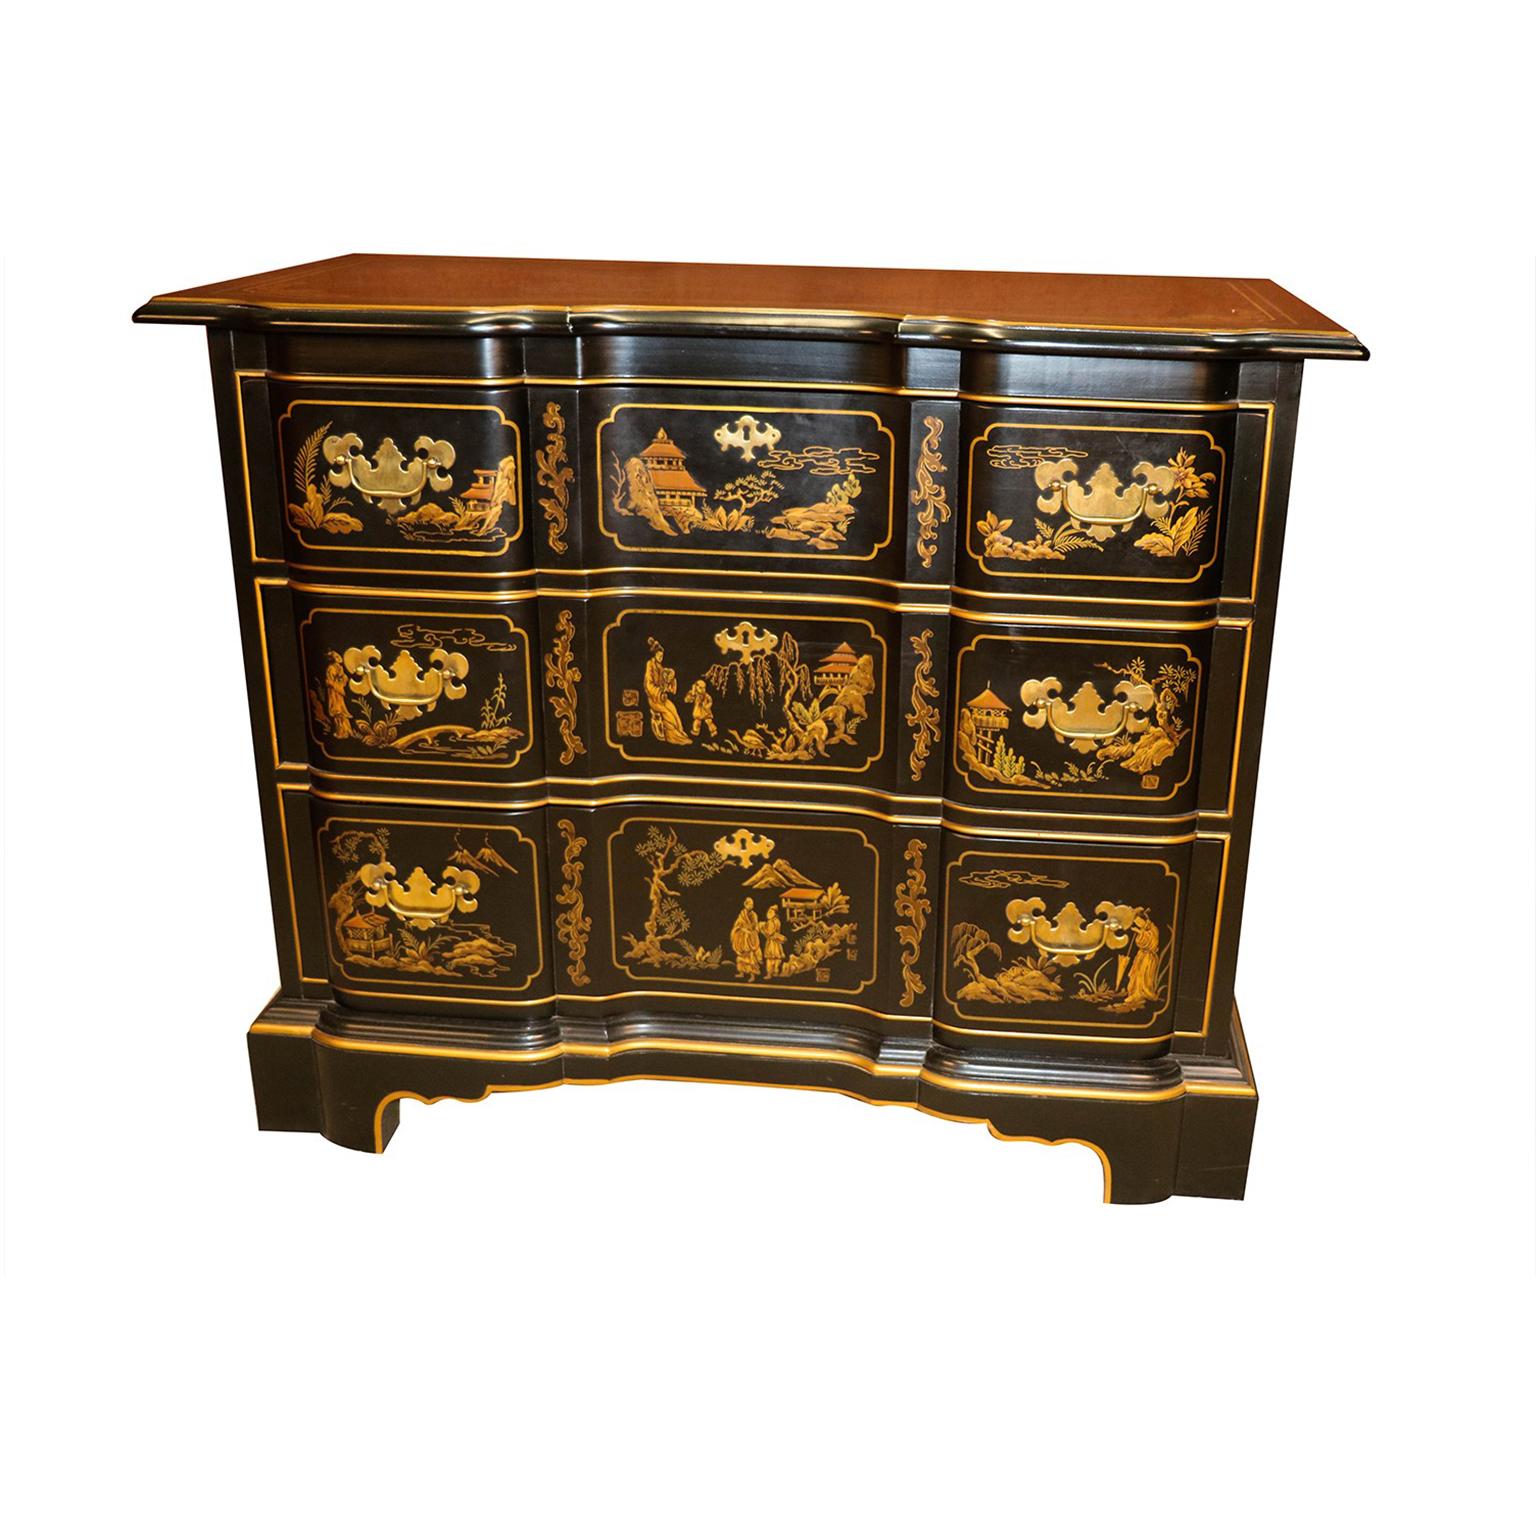 Late 20th Century Drexel Black Lacquer Chinoiserie Style Chest of Drawers Dresser Nightstand